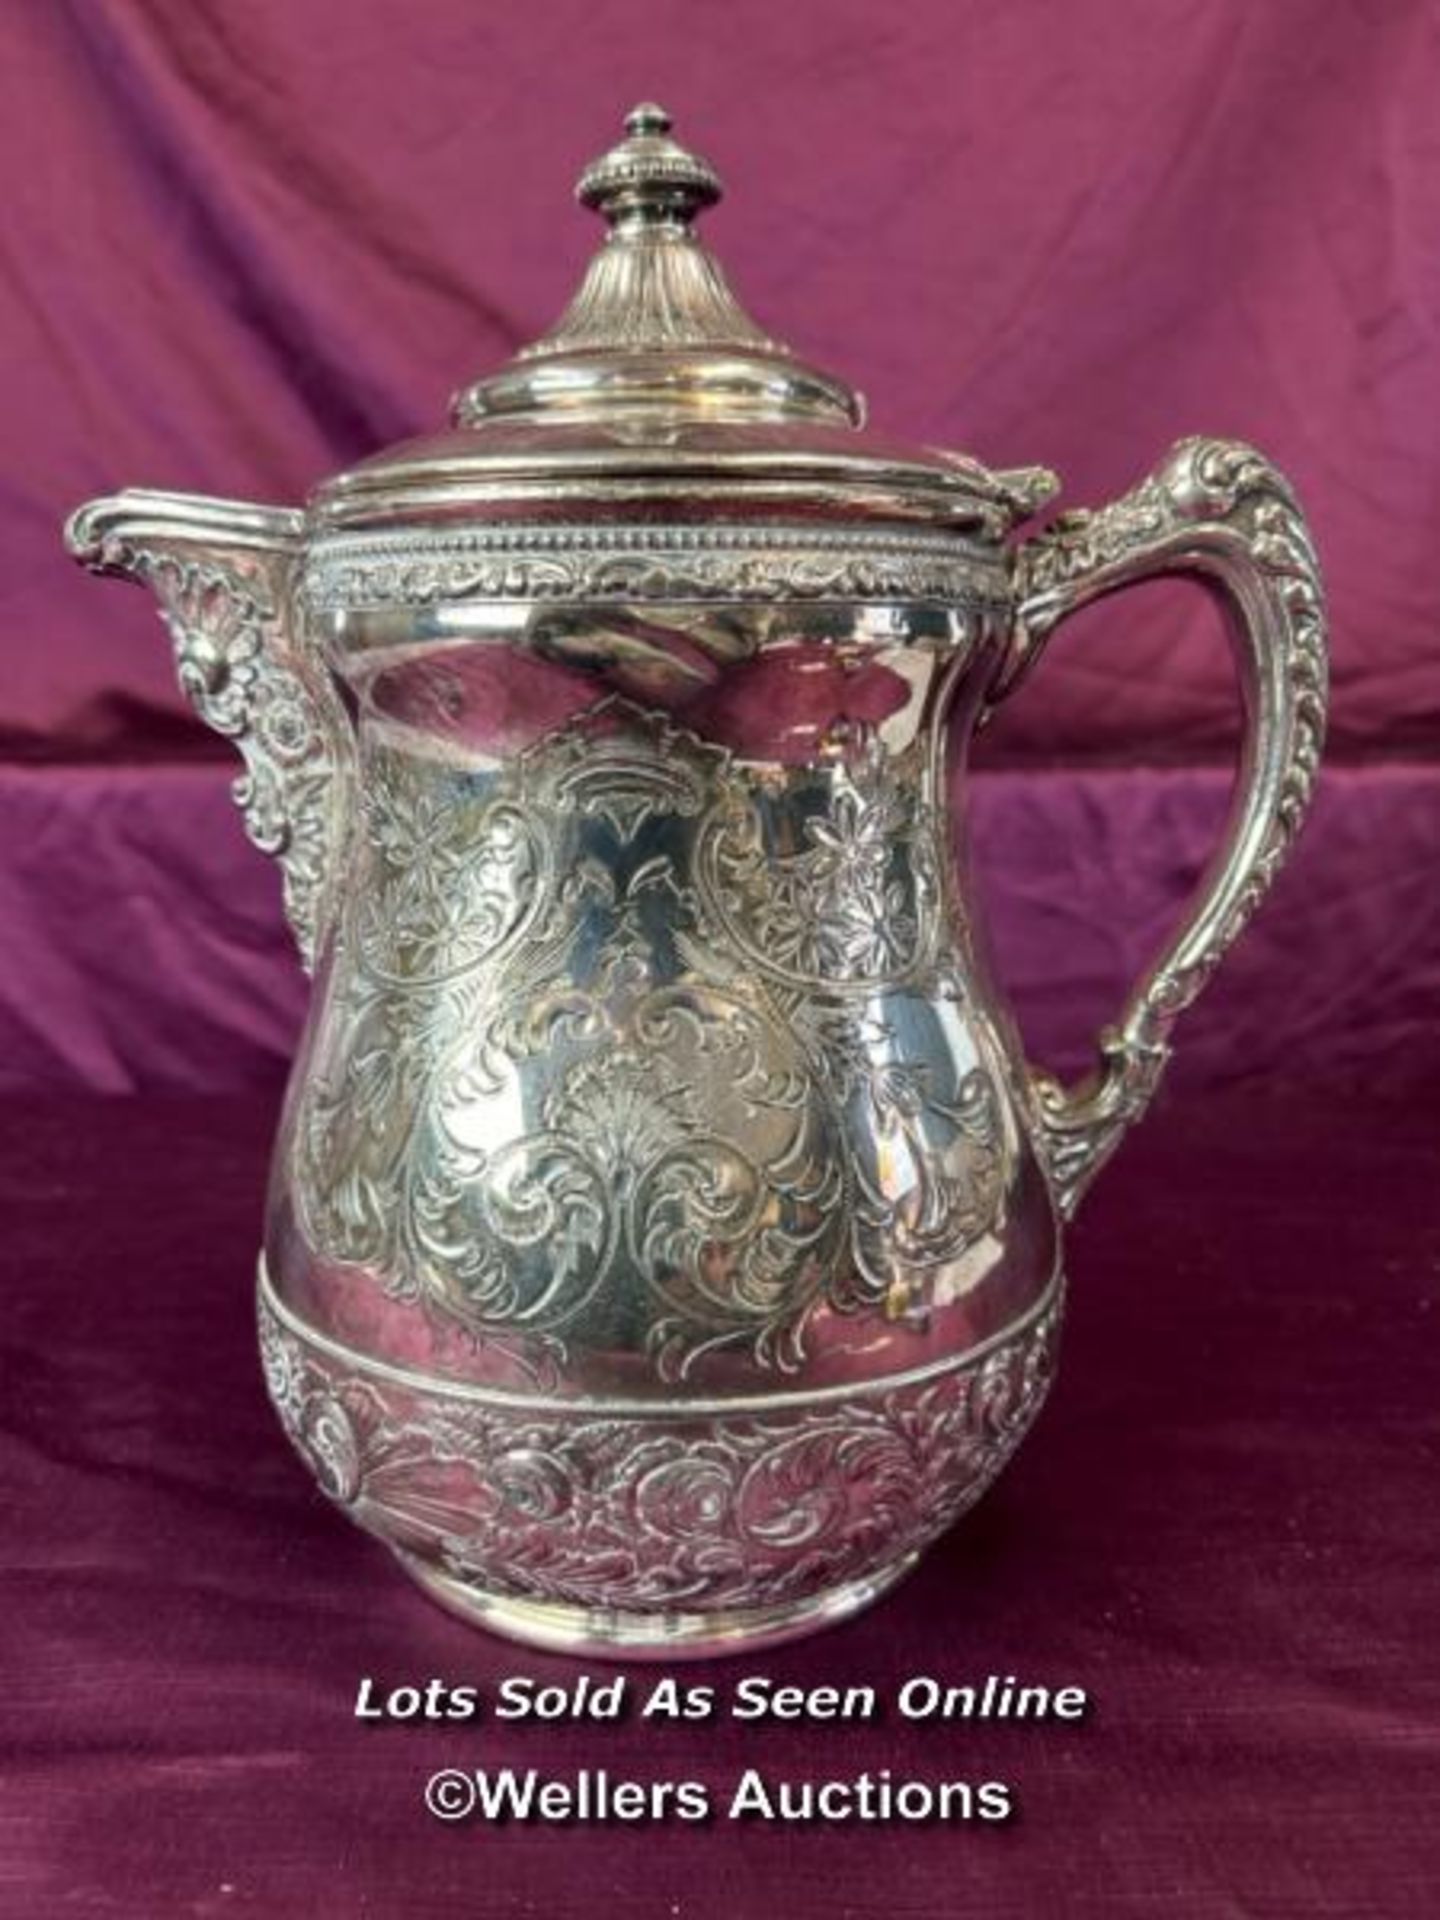 A SILVER PLATED JUG MADE BY MIDDLETOWN PLATE CO., HEIGHT 29CM - Image 4 of 4